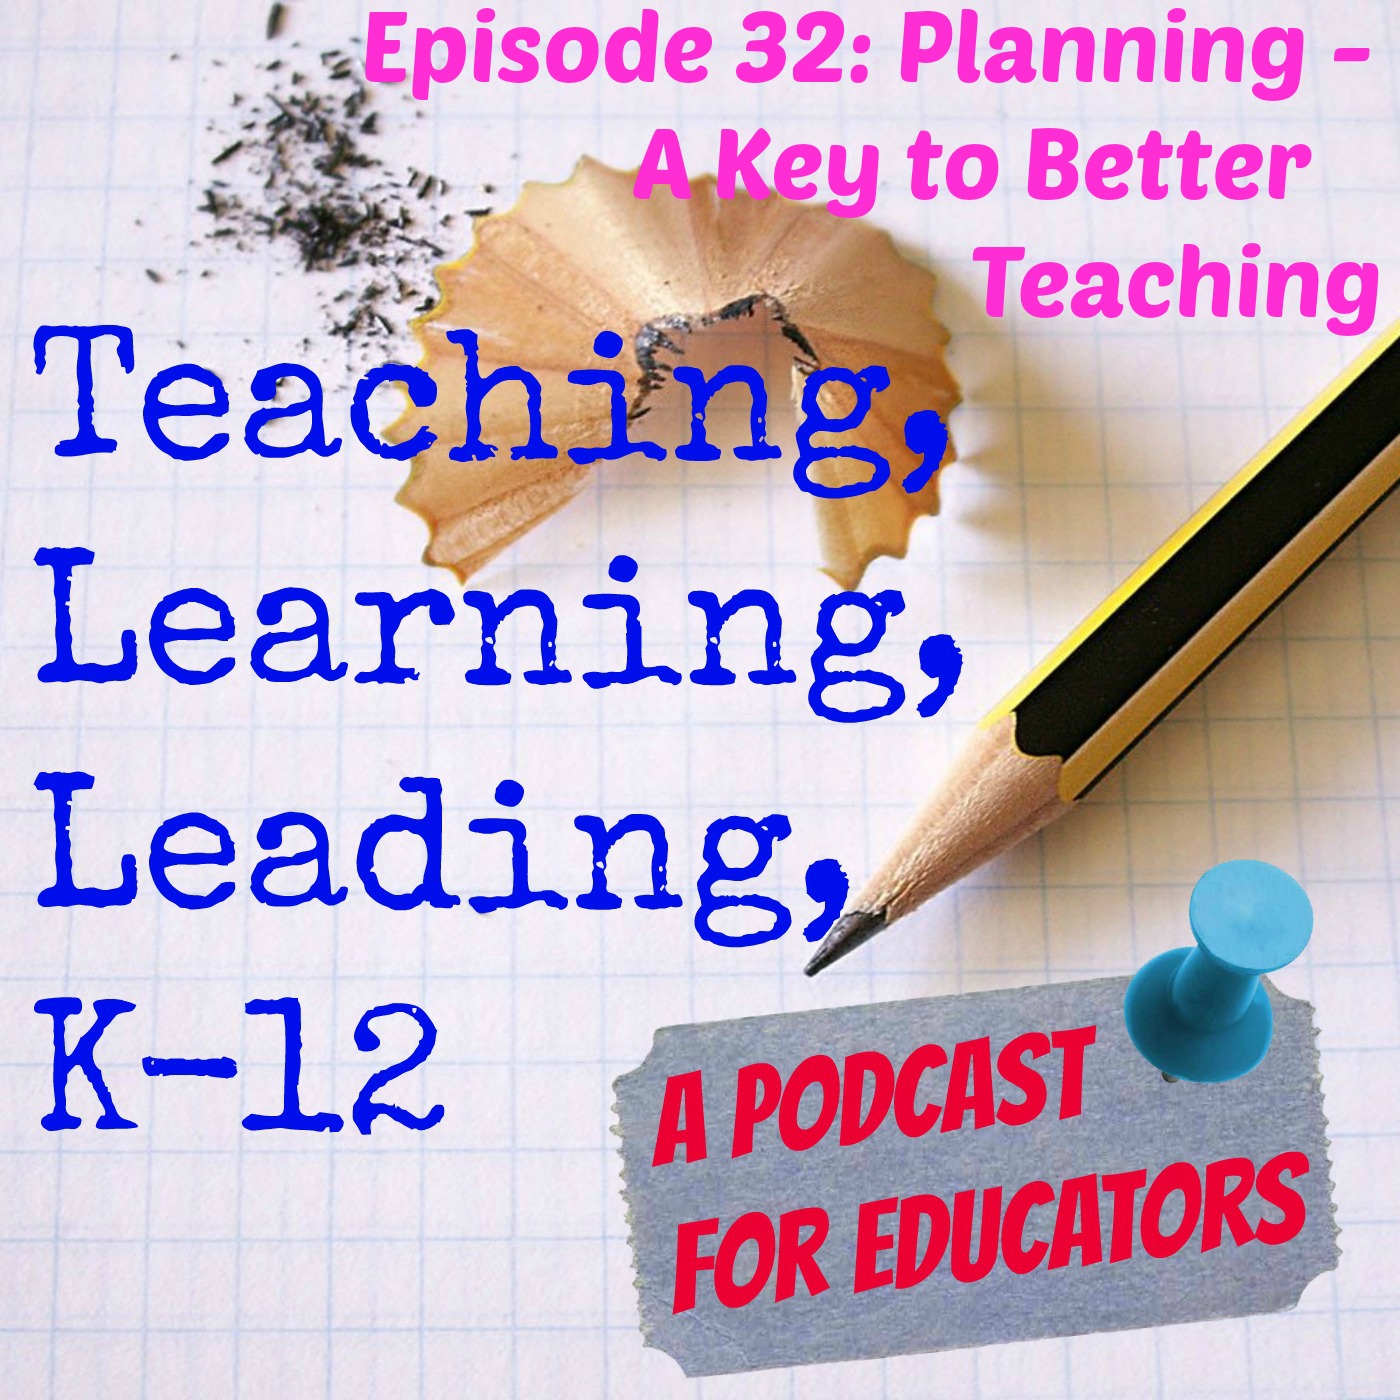 Episode 32: Planning-A Key to Better Teaching